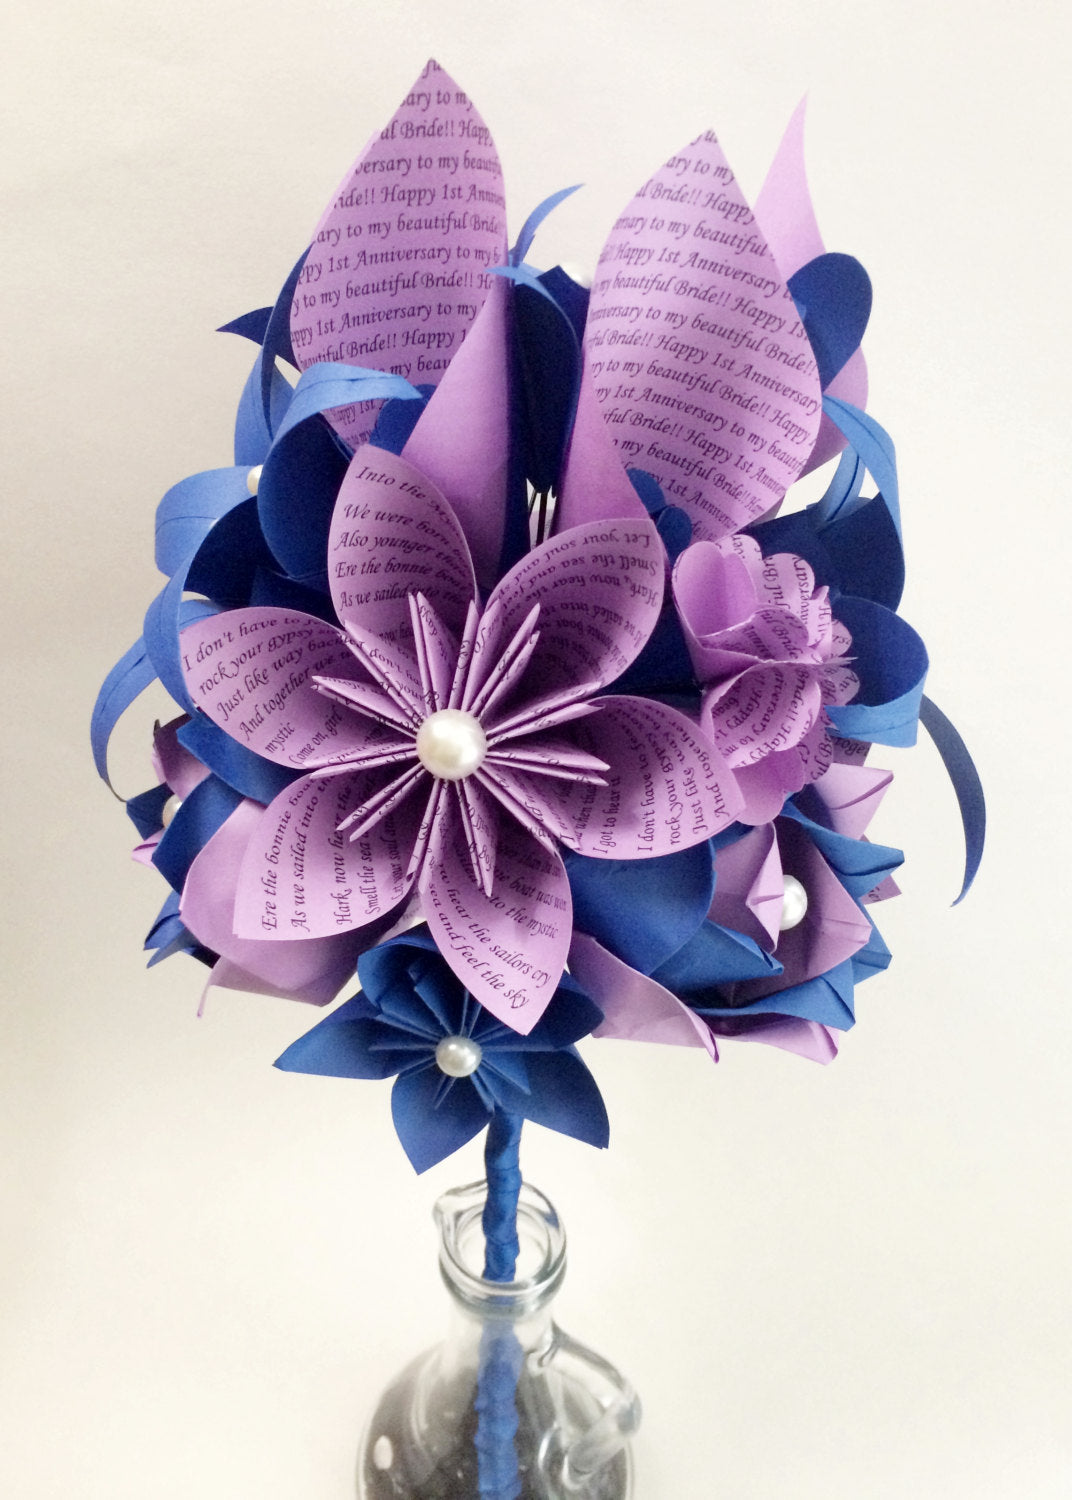 Make Your Own Paper Bouquet. From prototype to final product